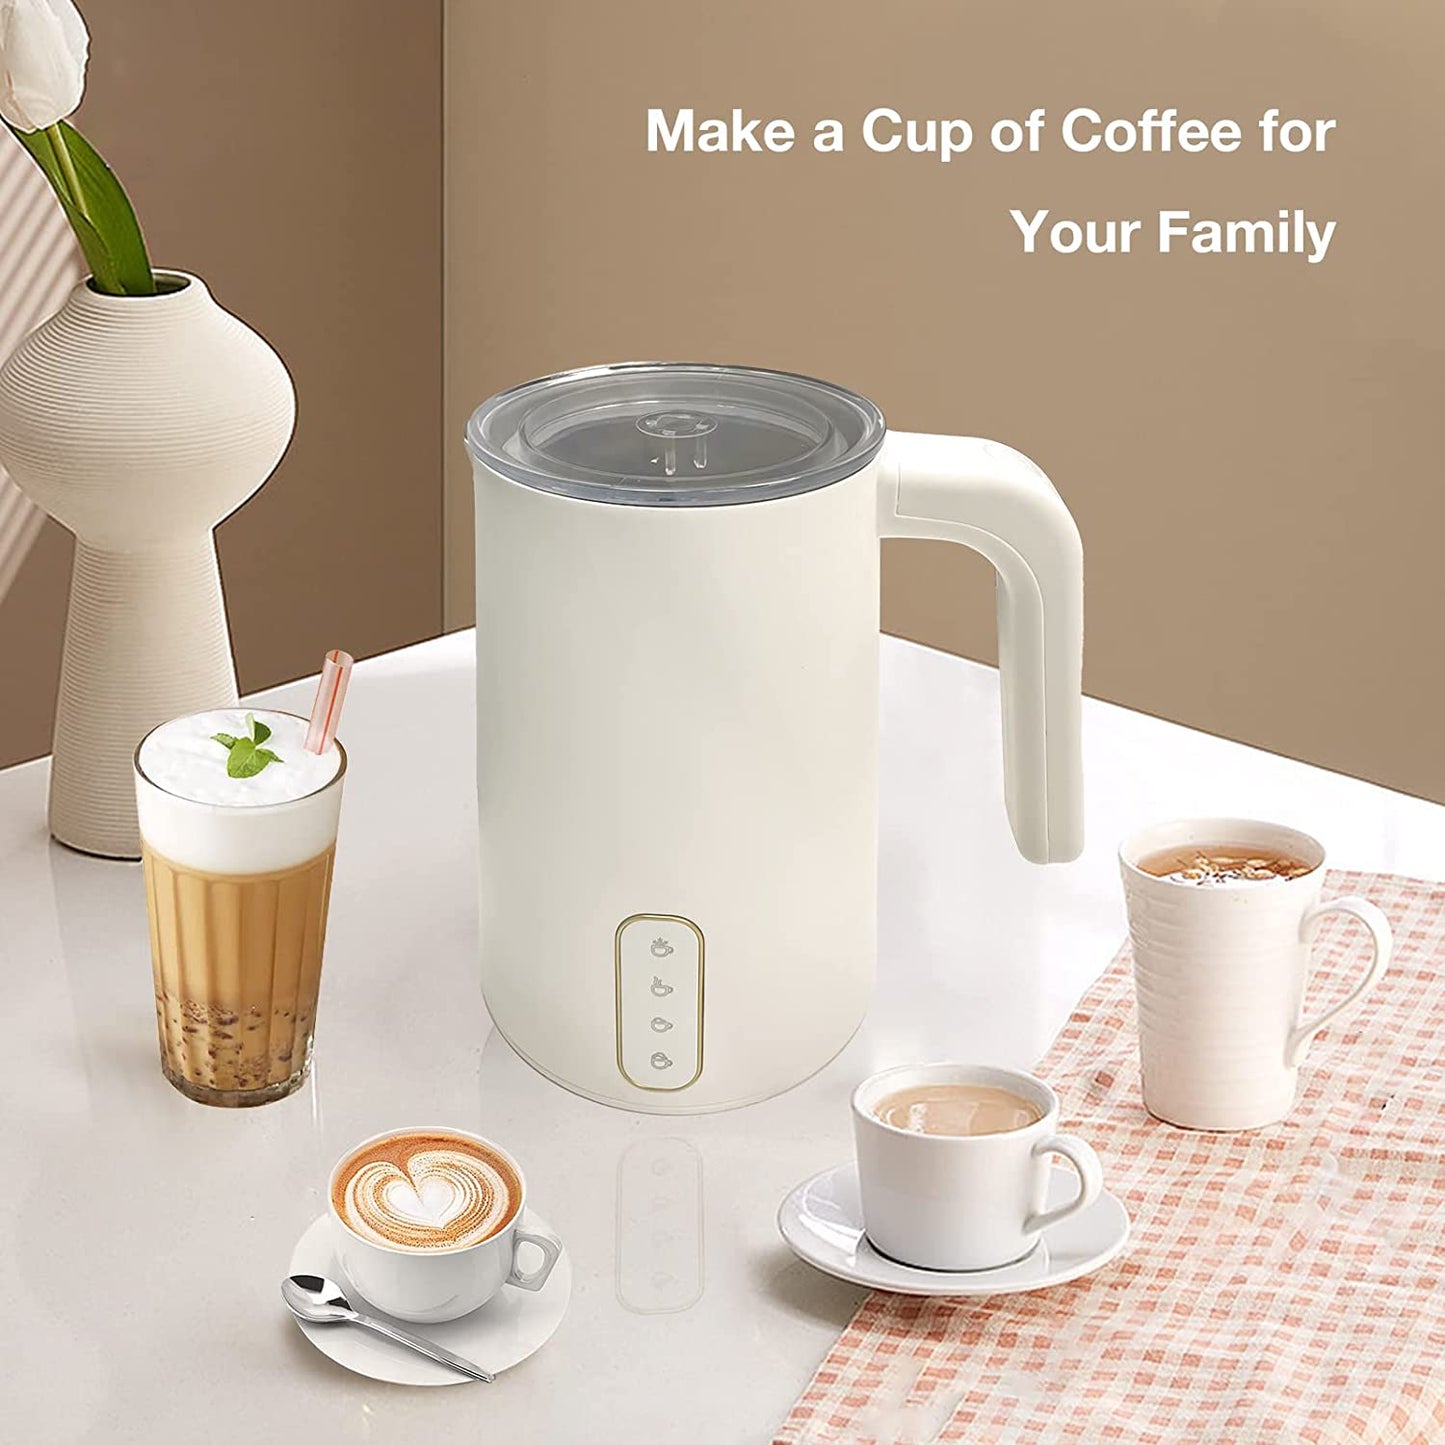 Milk Frother, Electric Milk Steamer, Milk Warmer, Automatic Hot/Cold Stainless Steel Foam Maker for Coffee, Latte, Cappuccino, Macchiato, Hot Chocolate